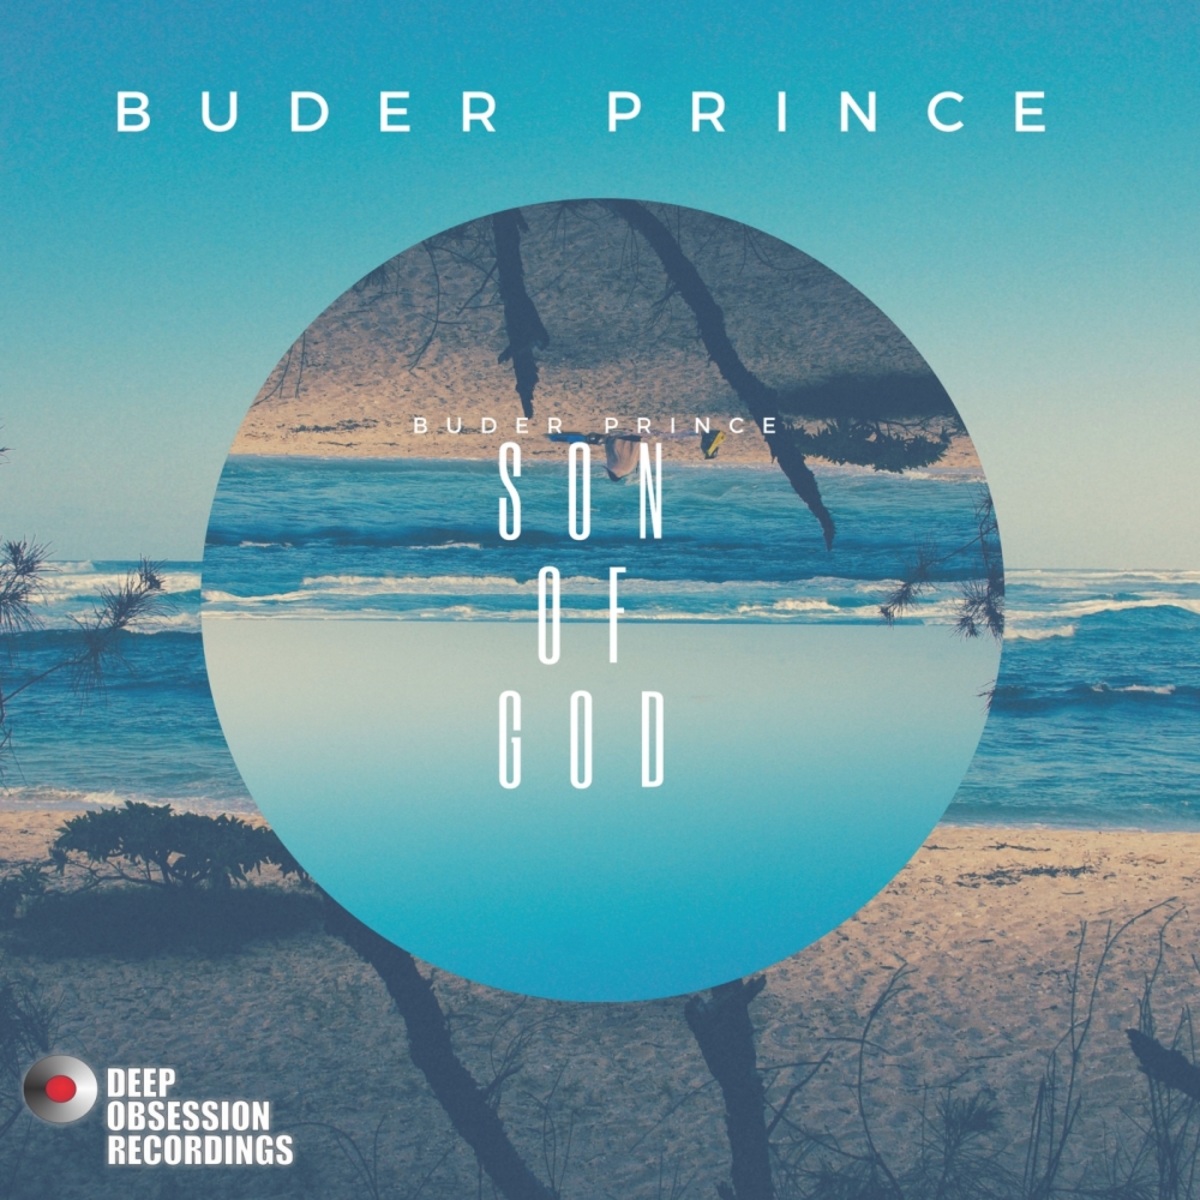 Buder Prince - Son Of God / Deep Obsession Recordings